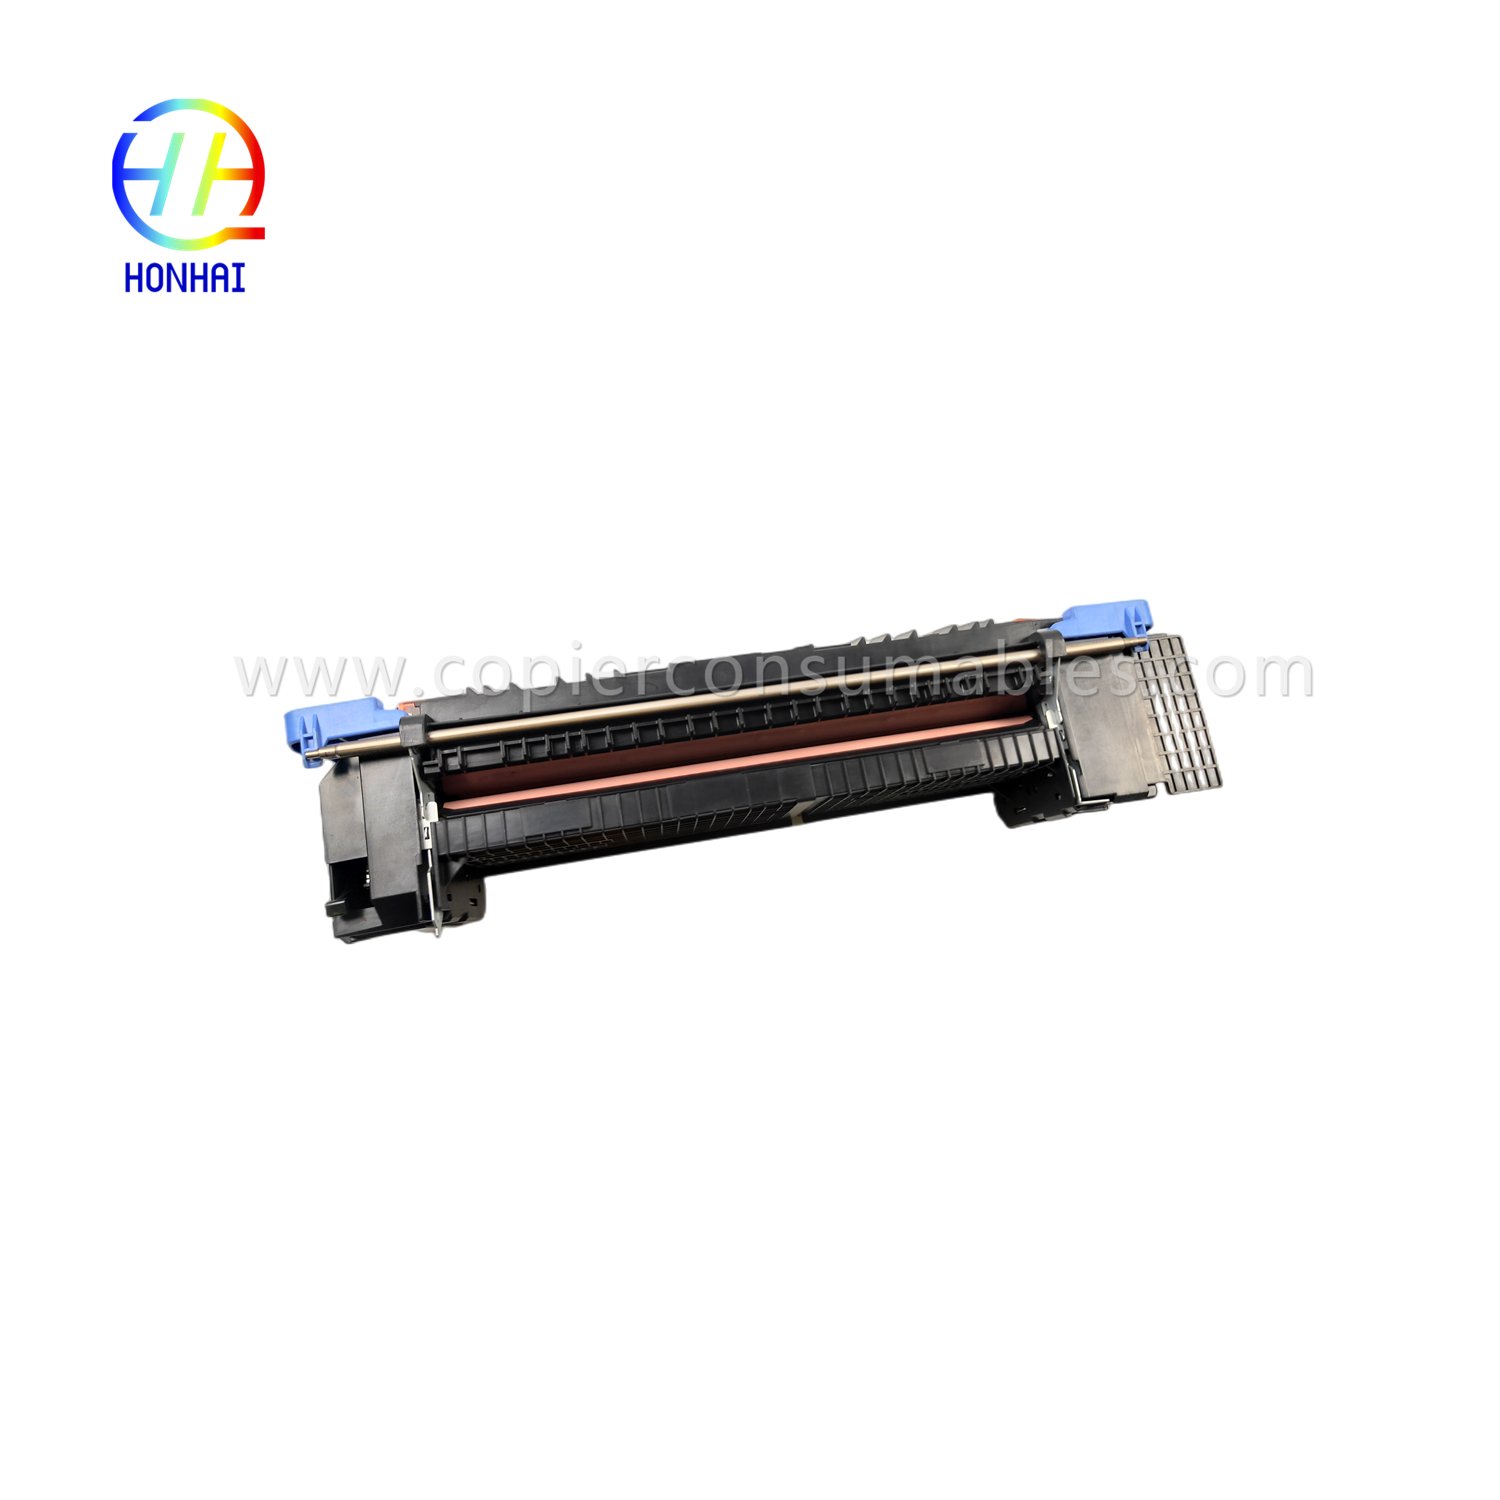 https://c585.goodao.net/fuser-assembly-unit-for-hp-m855-m880-m855dn-m855xh-m880z-m880z-c1n54-67901-c1n58-67901-fusing-heating-fixing-product/assy